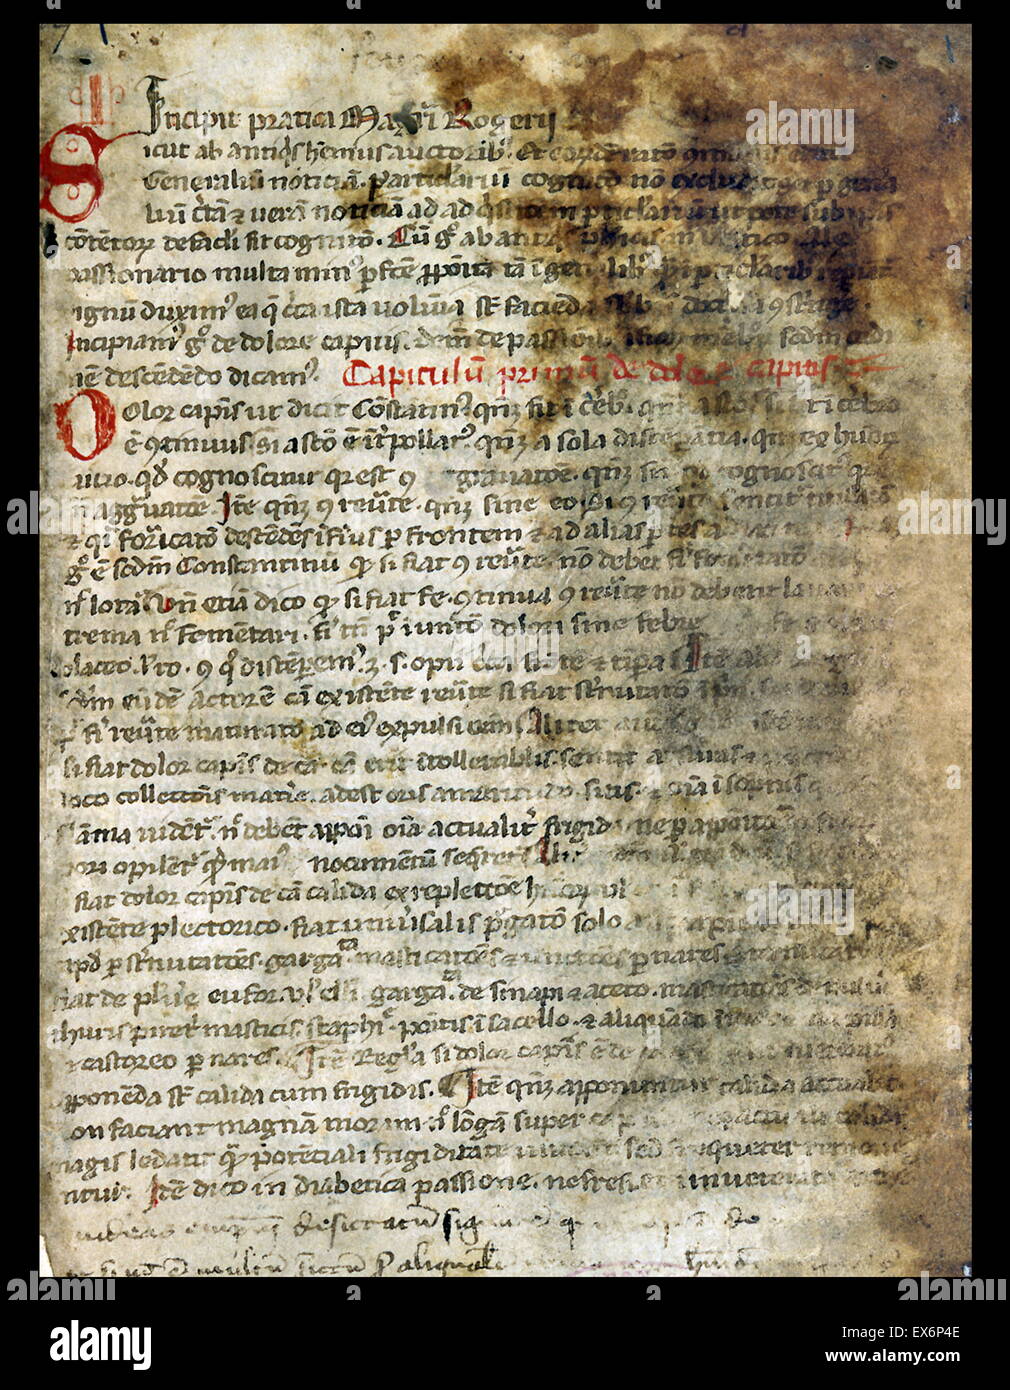 Roger of Salerno (ca. 1170), Practica (Practice). The Practica, such as that by Roger, were collections of treatments, very often based on the daily experience of physicians. Stock Photo